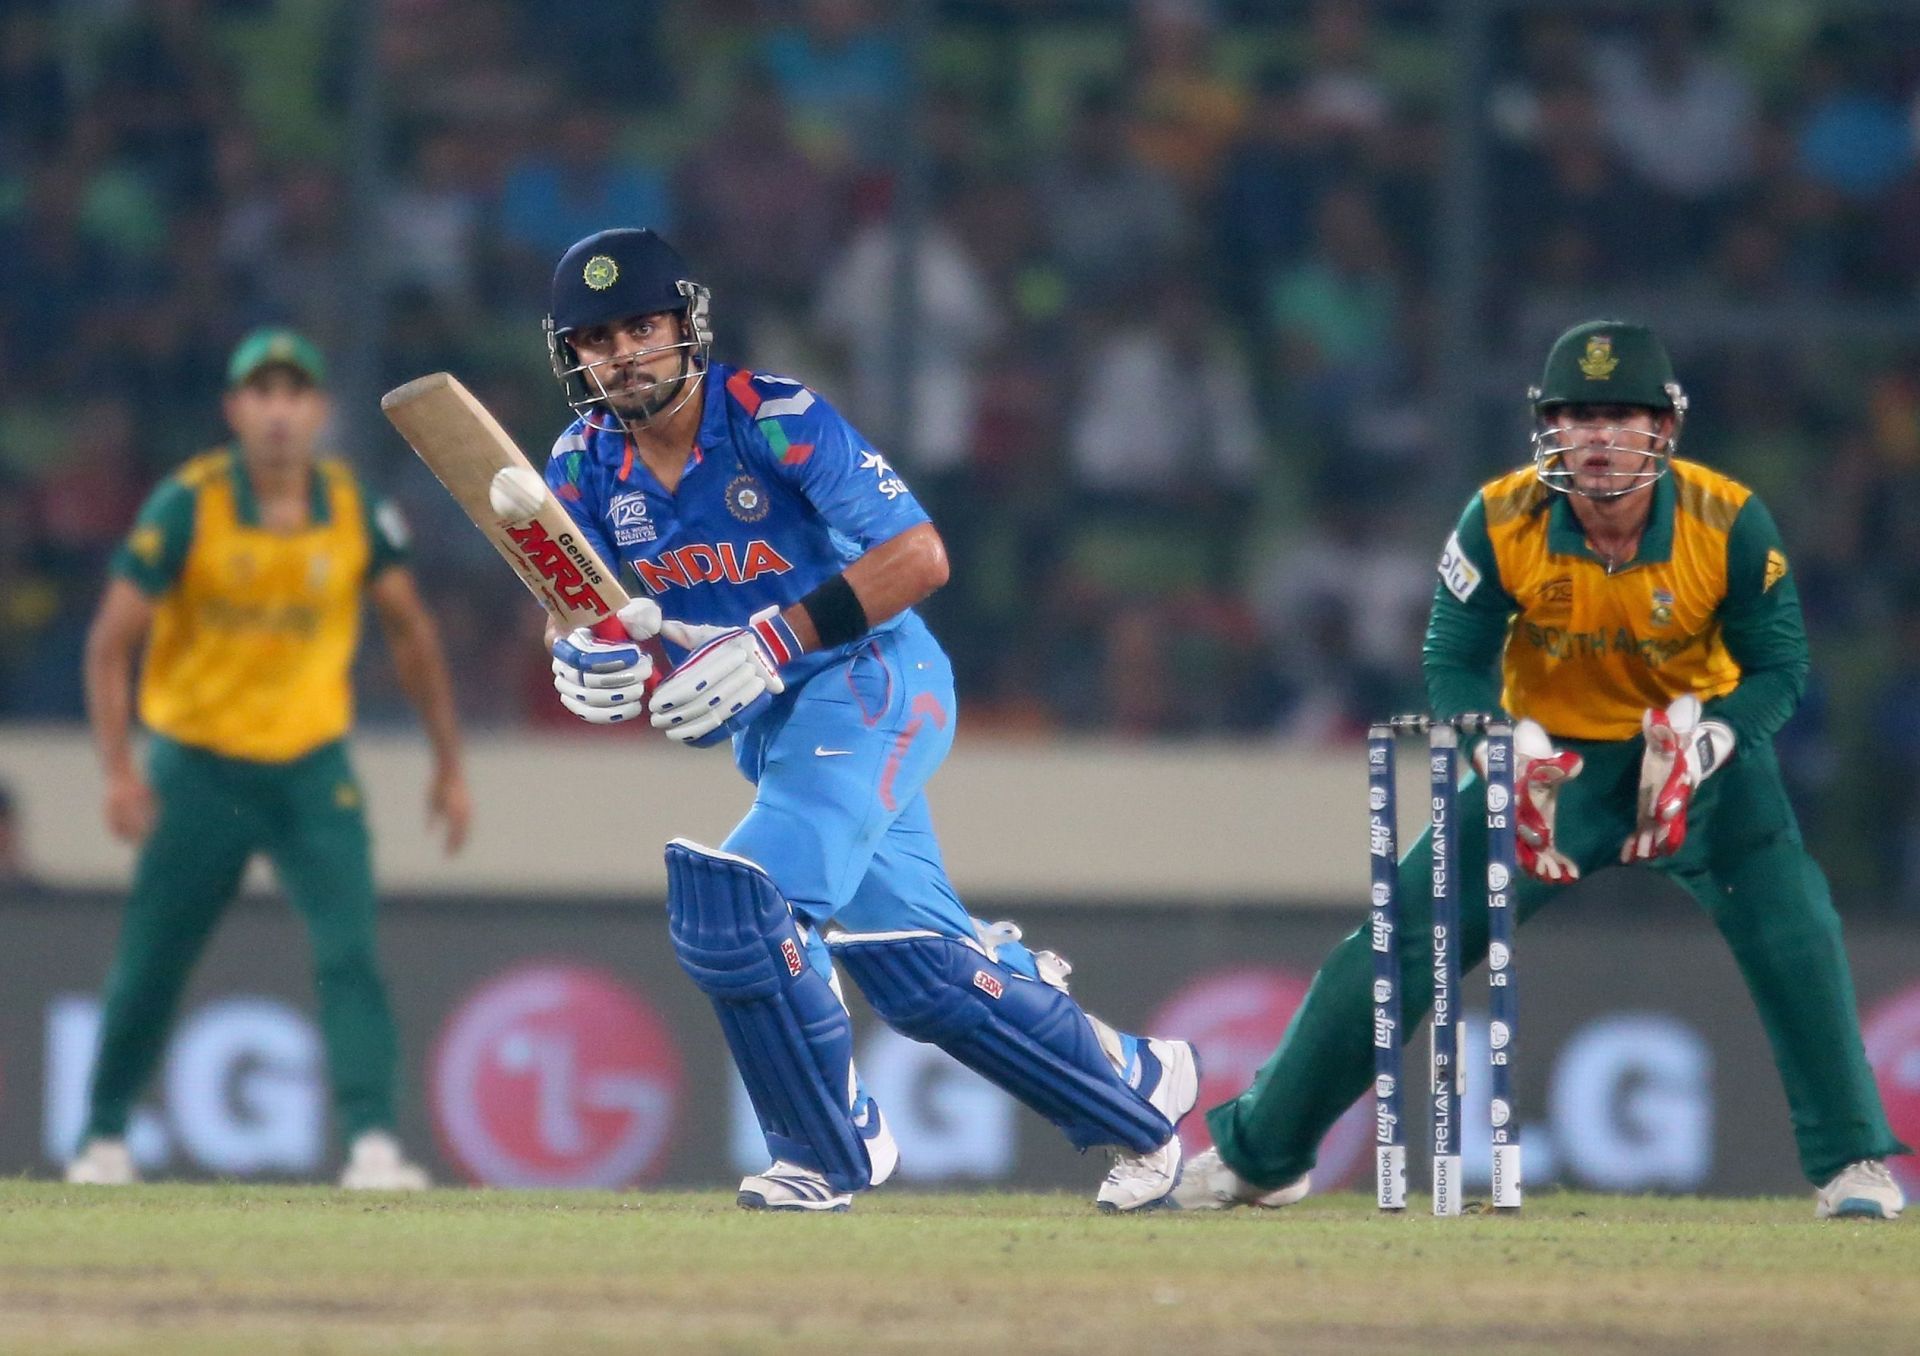 Virat Kohli bats during the 2014 T20 World Cup semi-final against South Africa. Pic: Getty Images